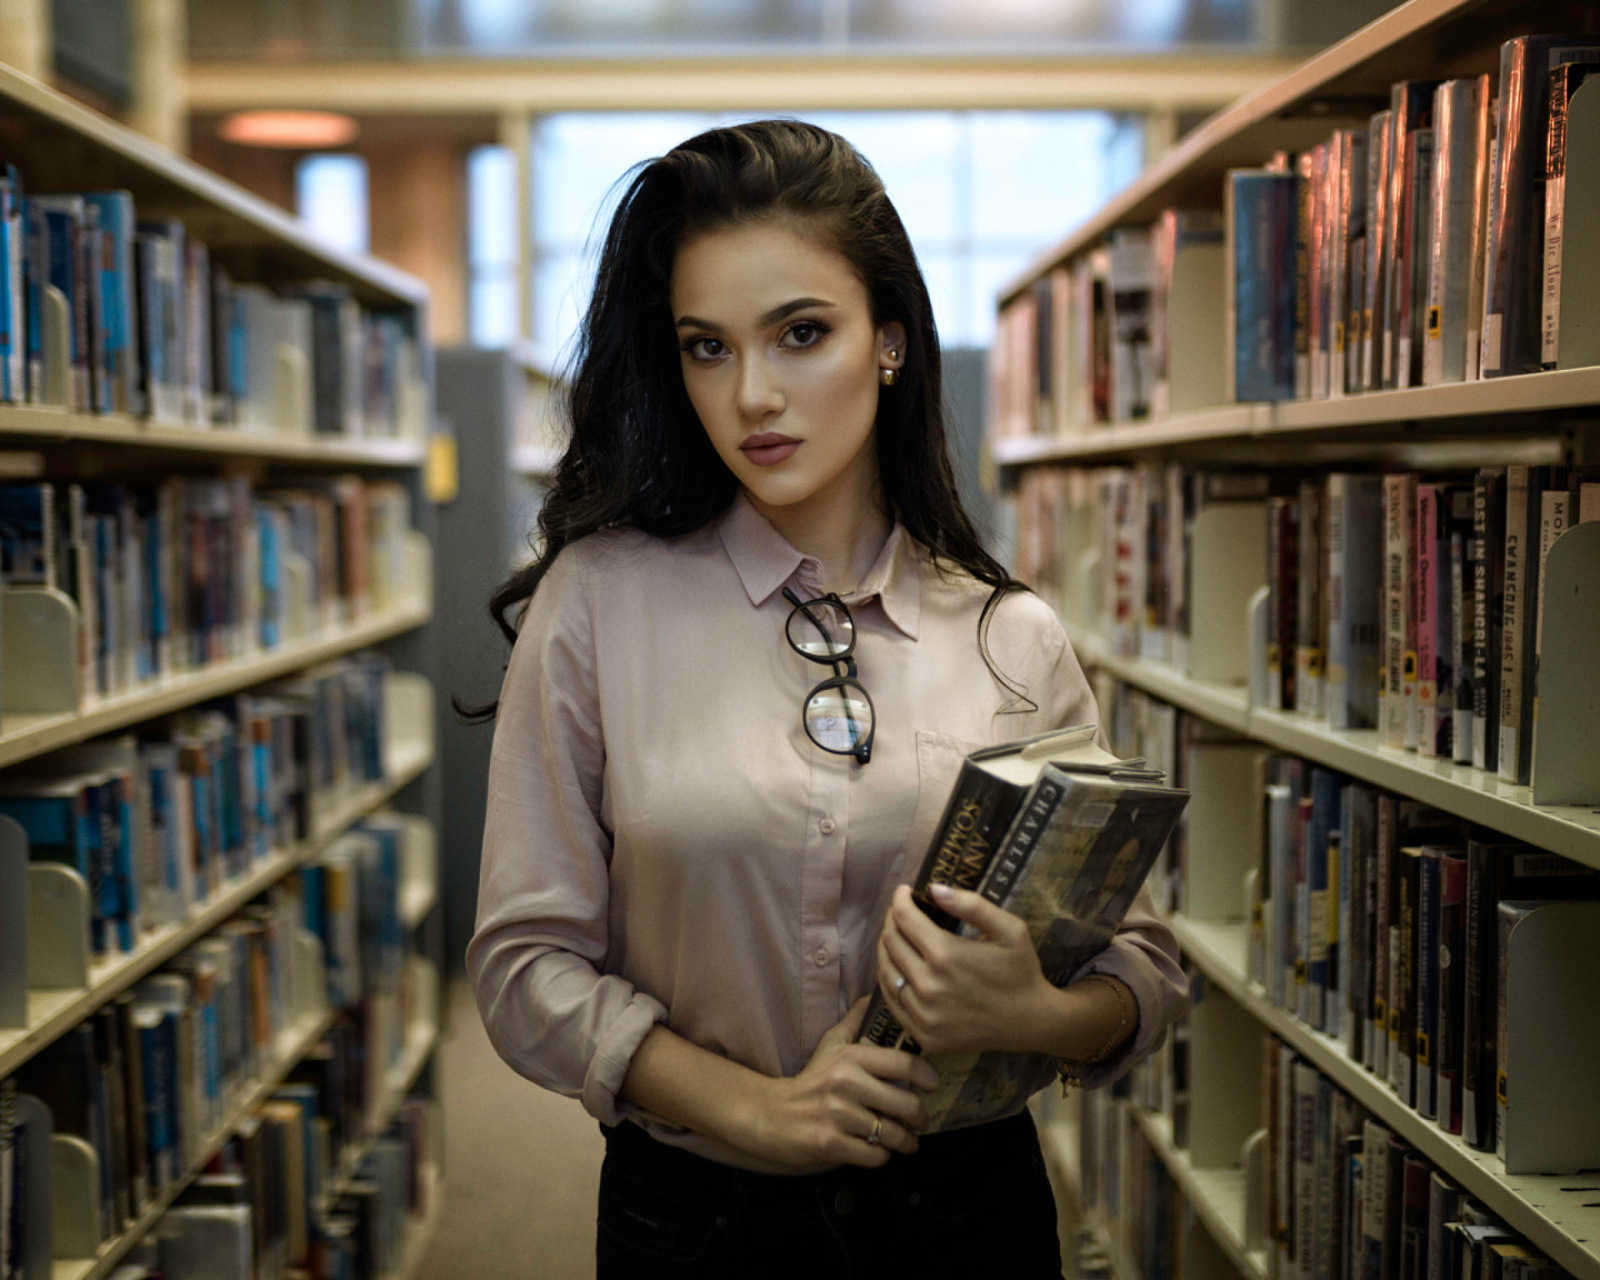 Girl with books in library wallpaper 1600x1280